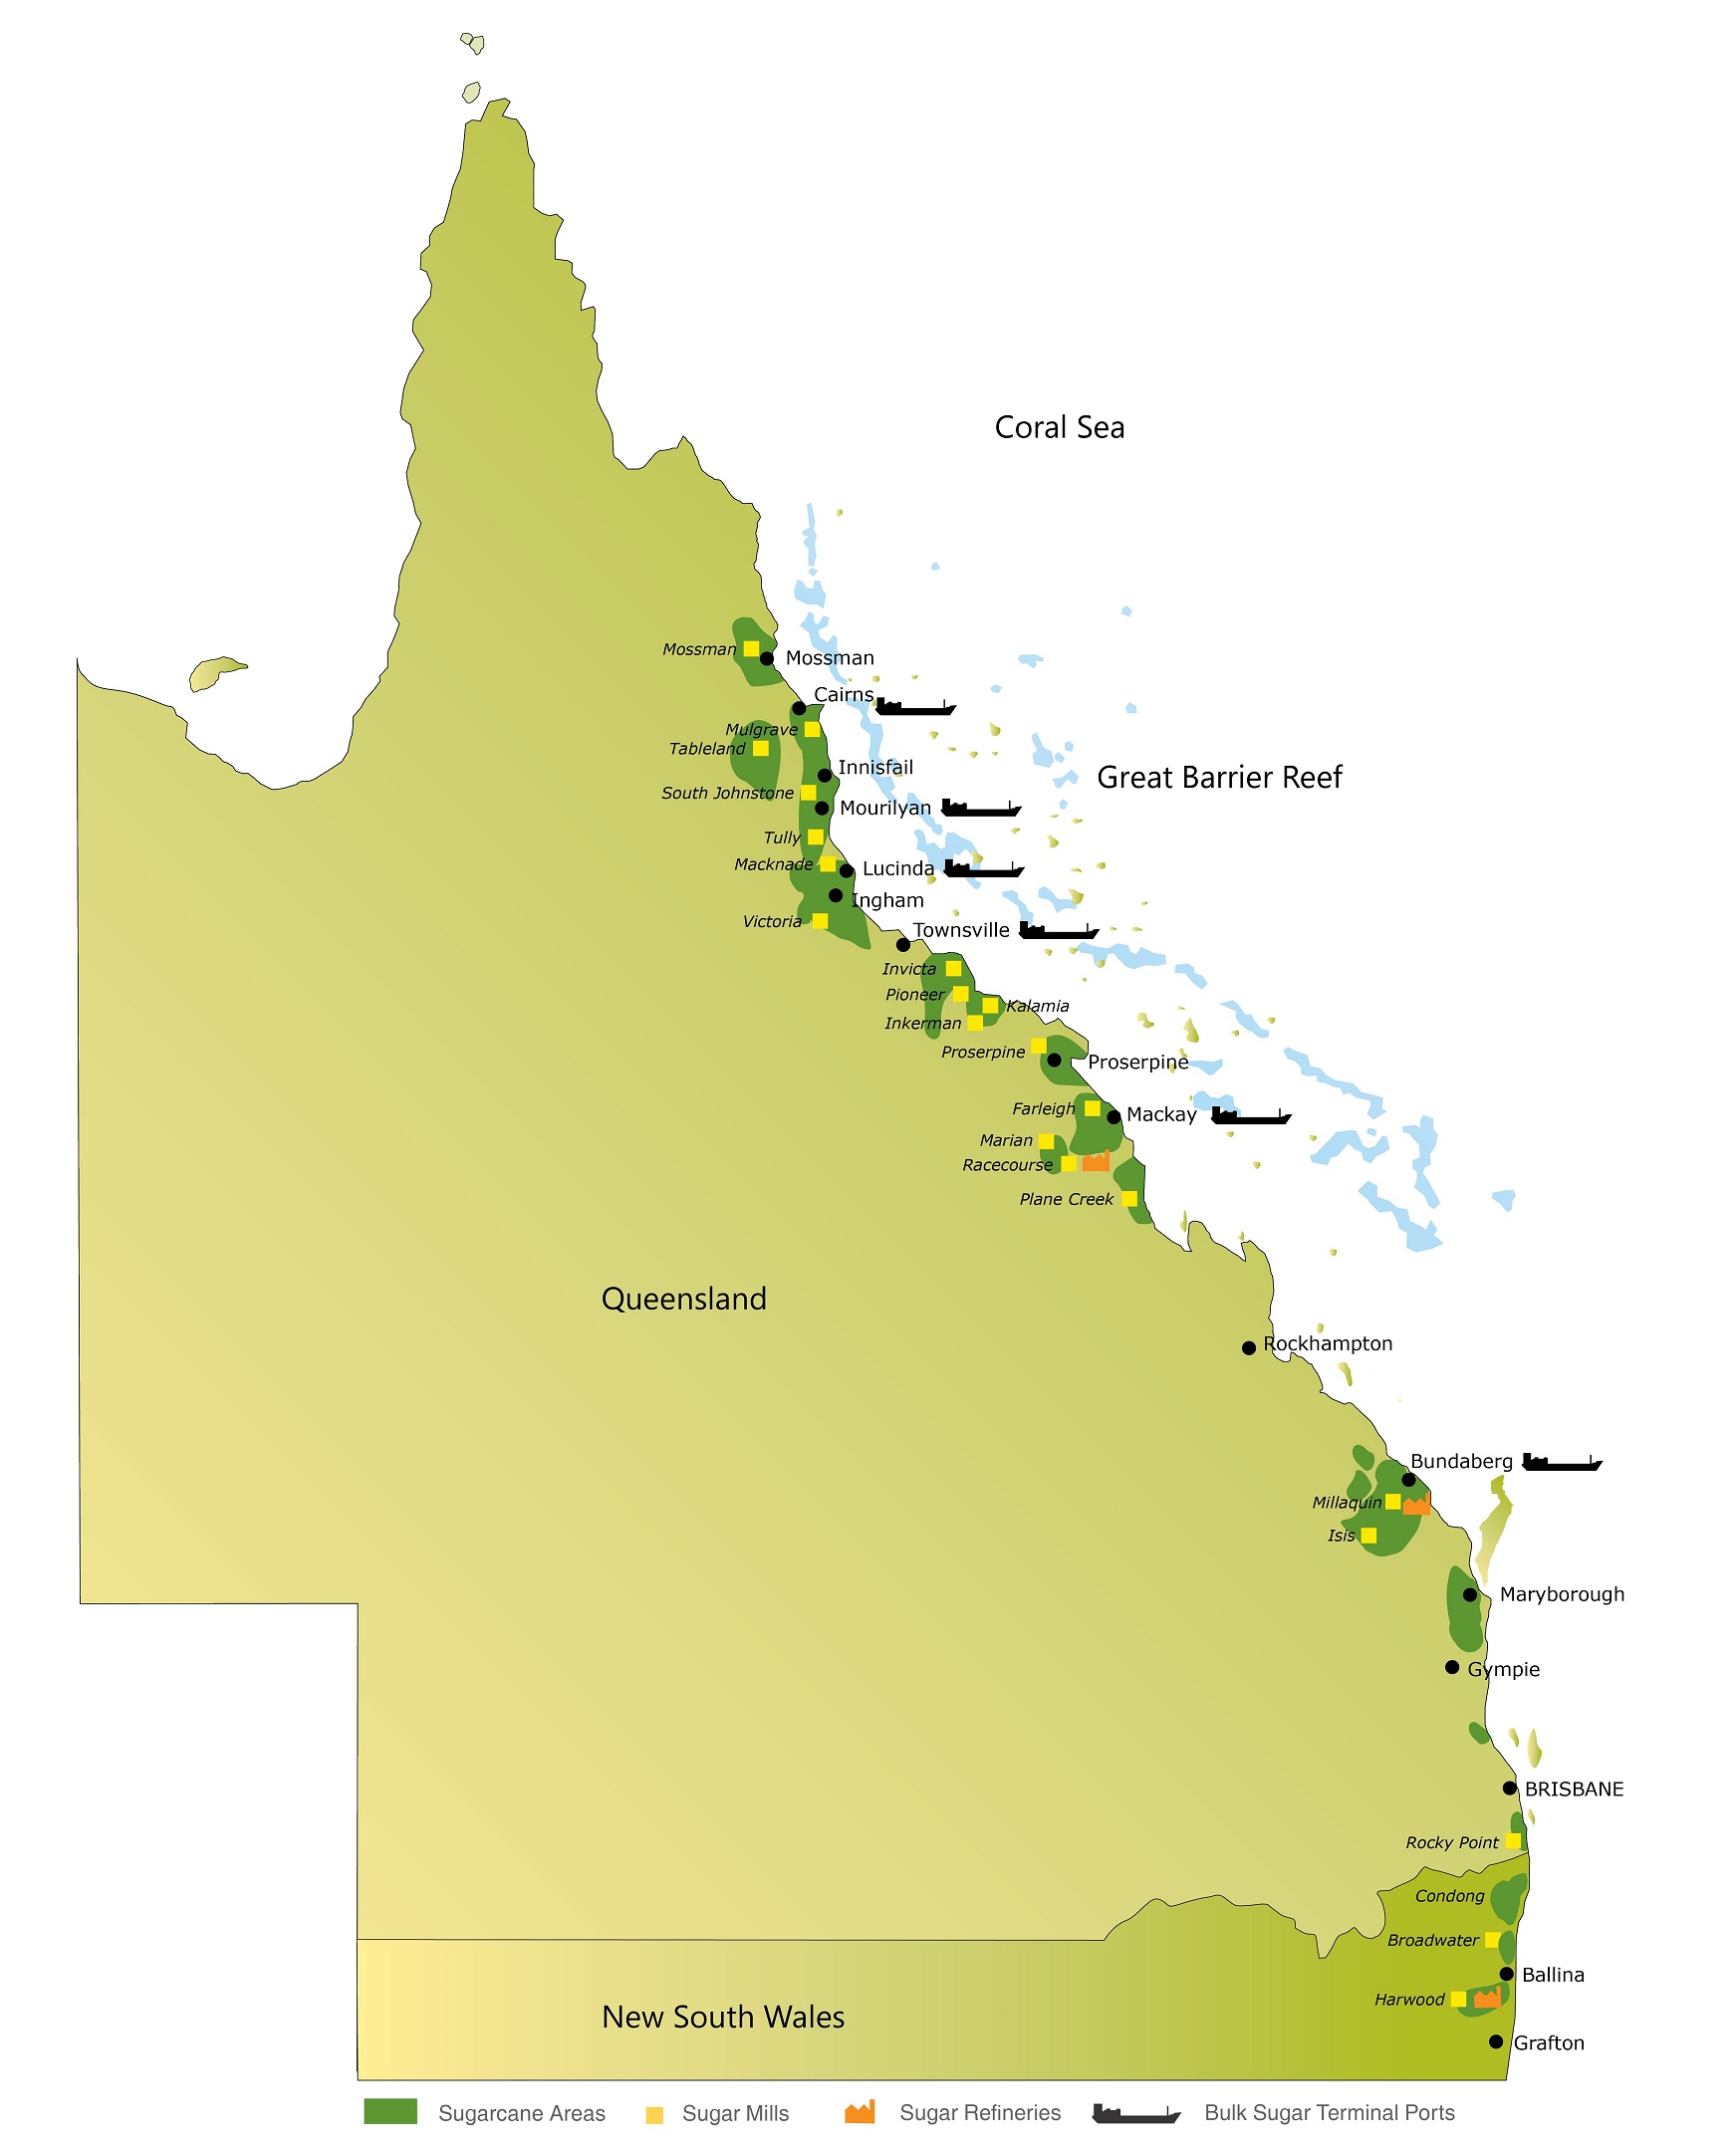 Sugarcane is grown along a 2,000 km stretch of Australia’s east coast by approximately 4,300 farmers. There are a number of associated operations in the supply chain including mills, refineries and export terminals. Source: CANEGROWERS Australia.